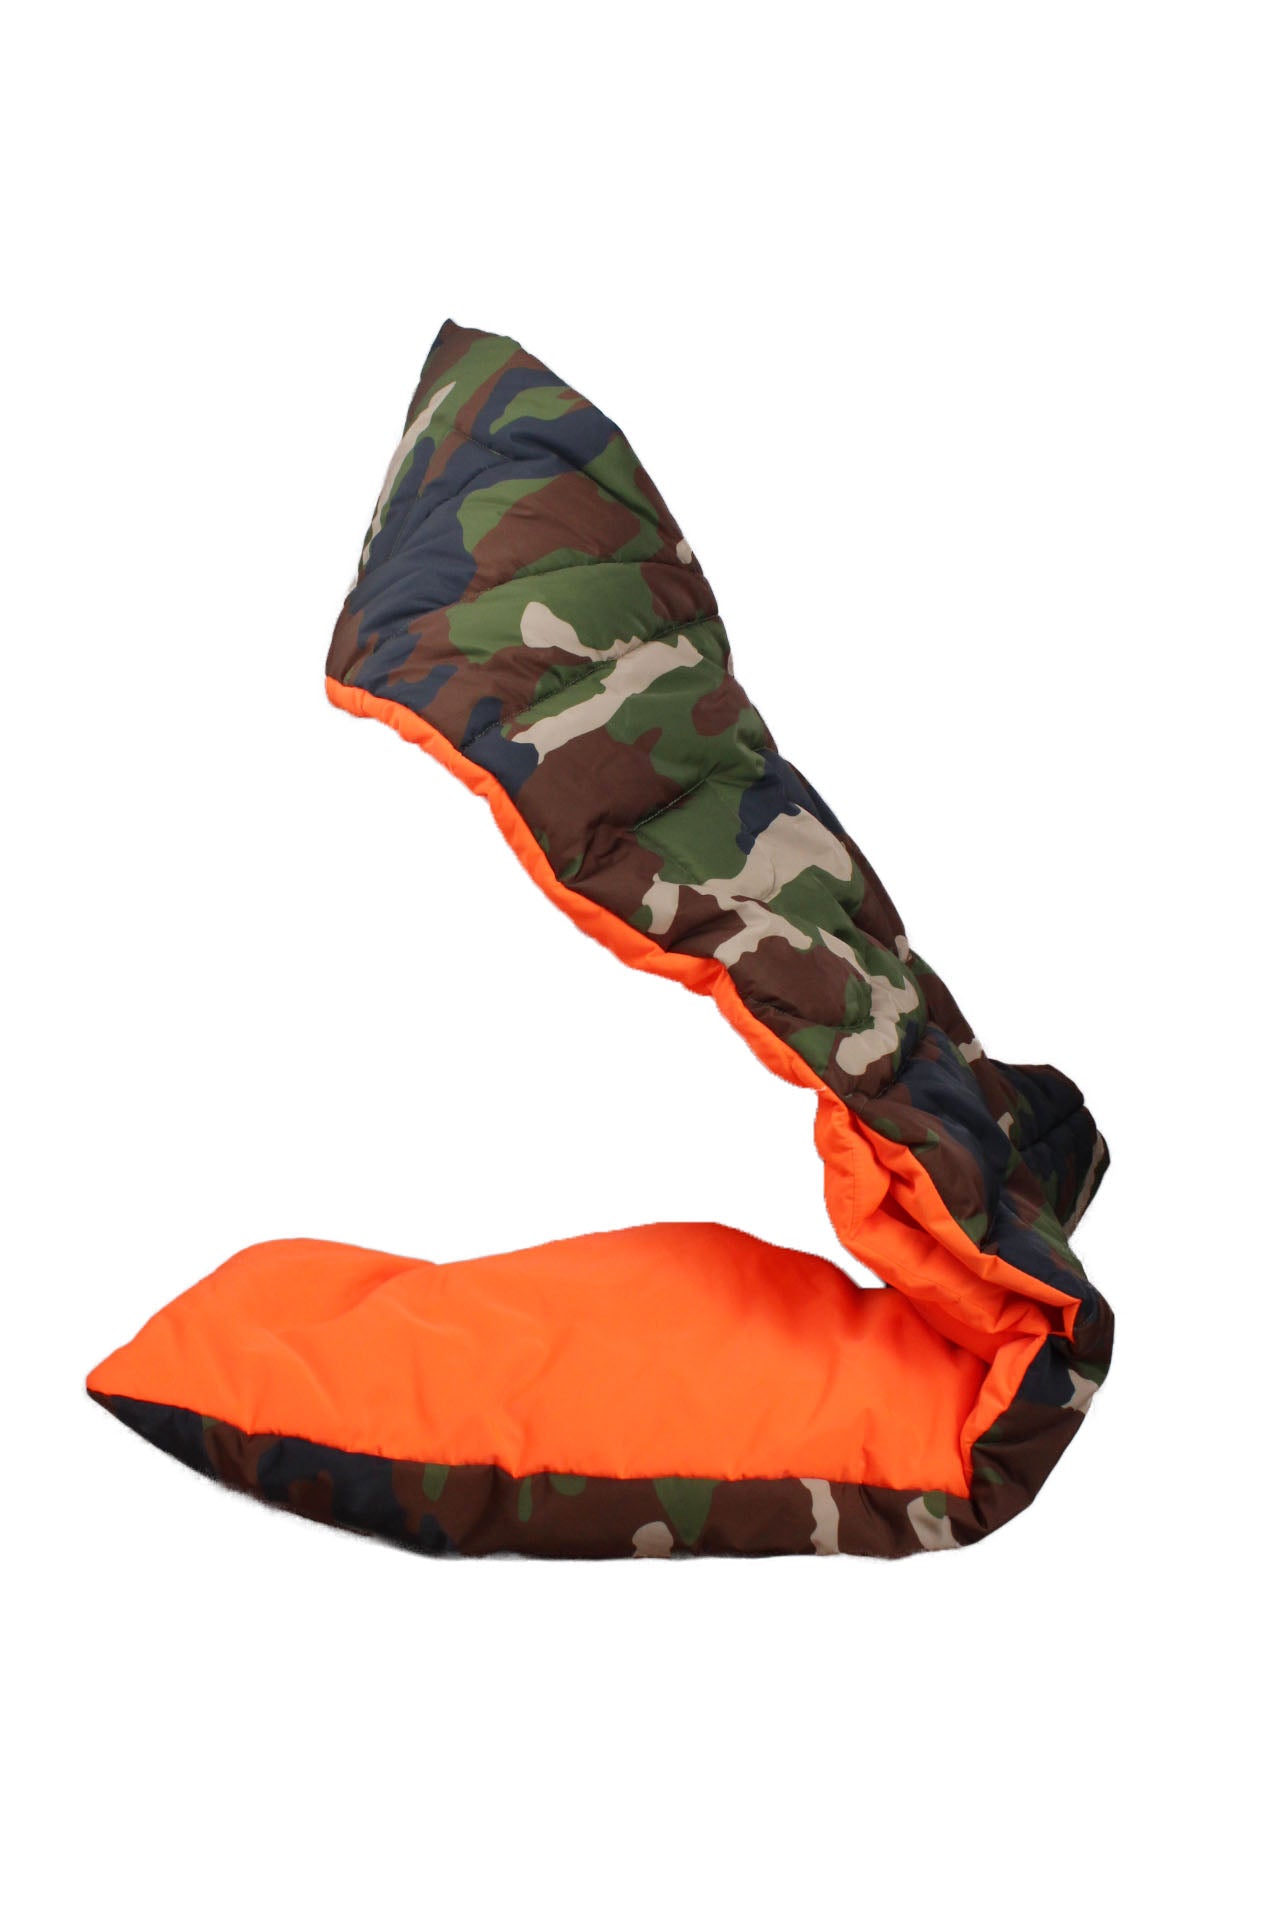 folded view showing both camo/orange color sides.